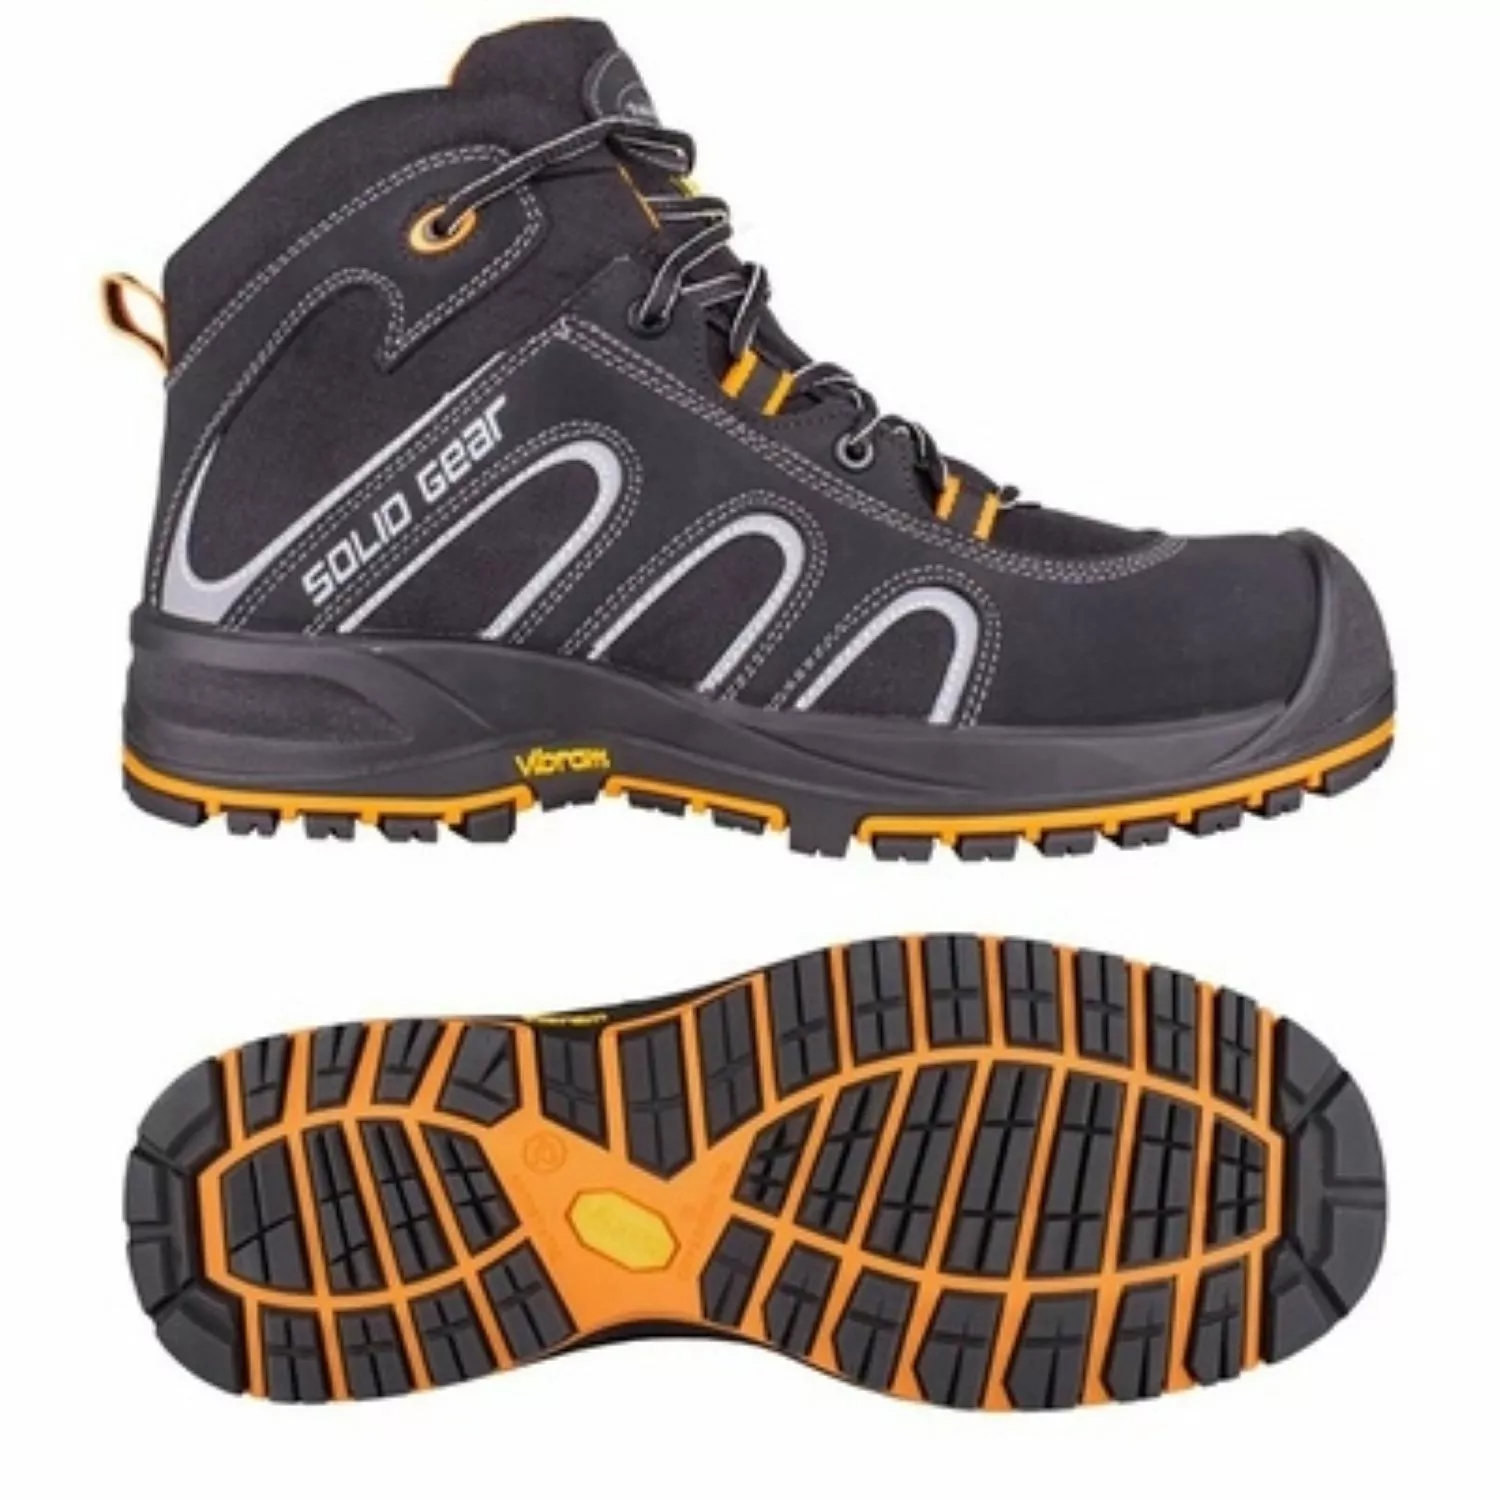 Solid Gear 73002 Falcon chaussure de travail - taille 41-image